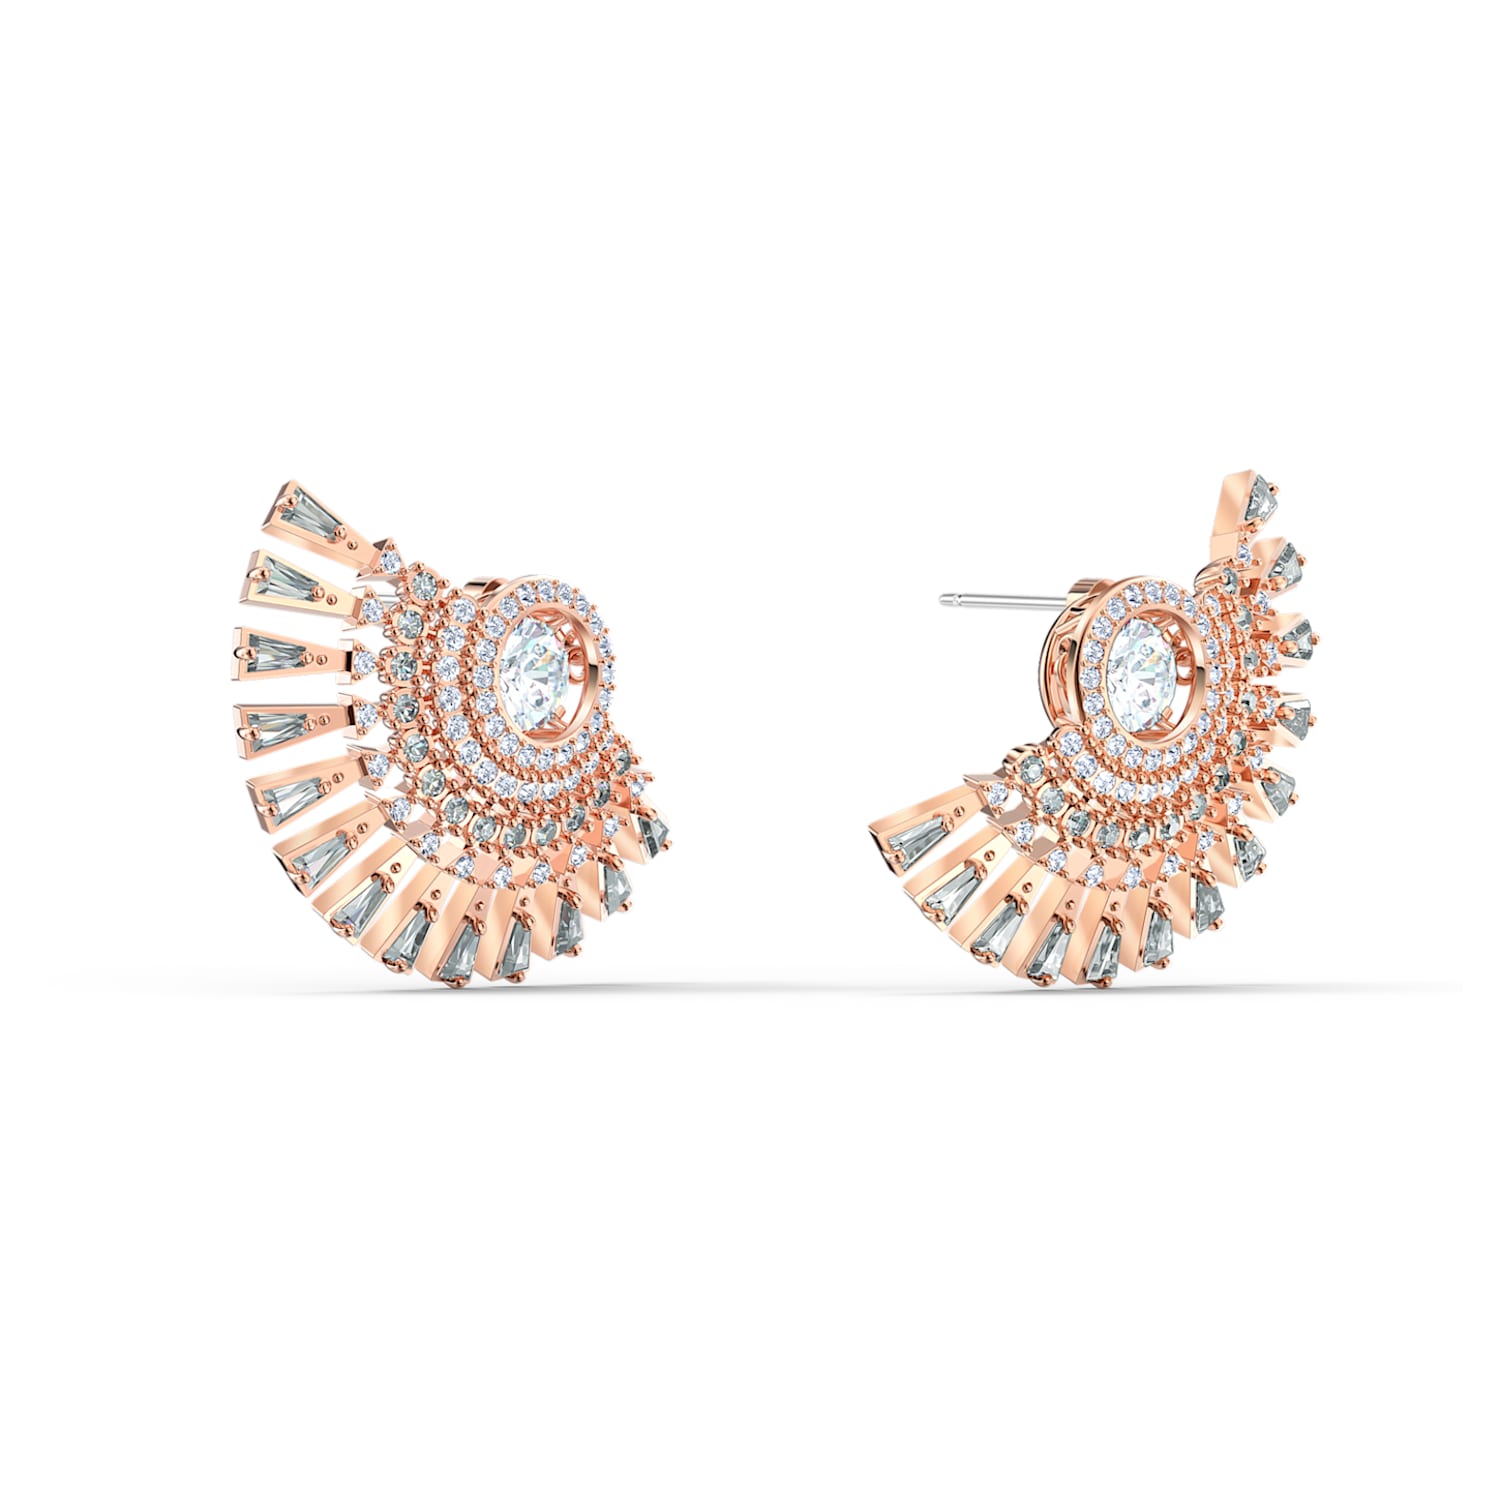 Swarovski Sparkling Dance Dial Up earrings, Gray, Rose gold-tone plated